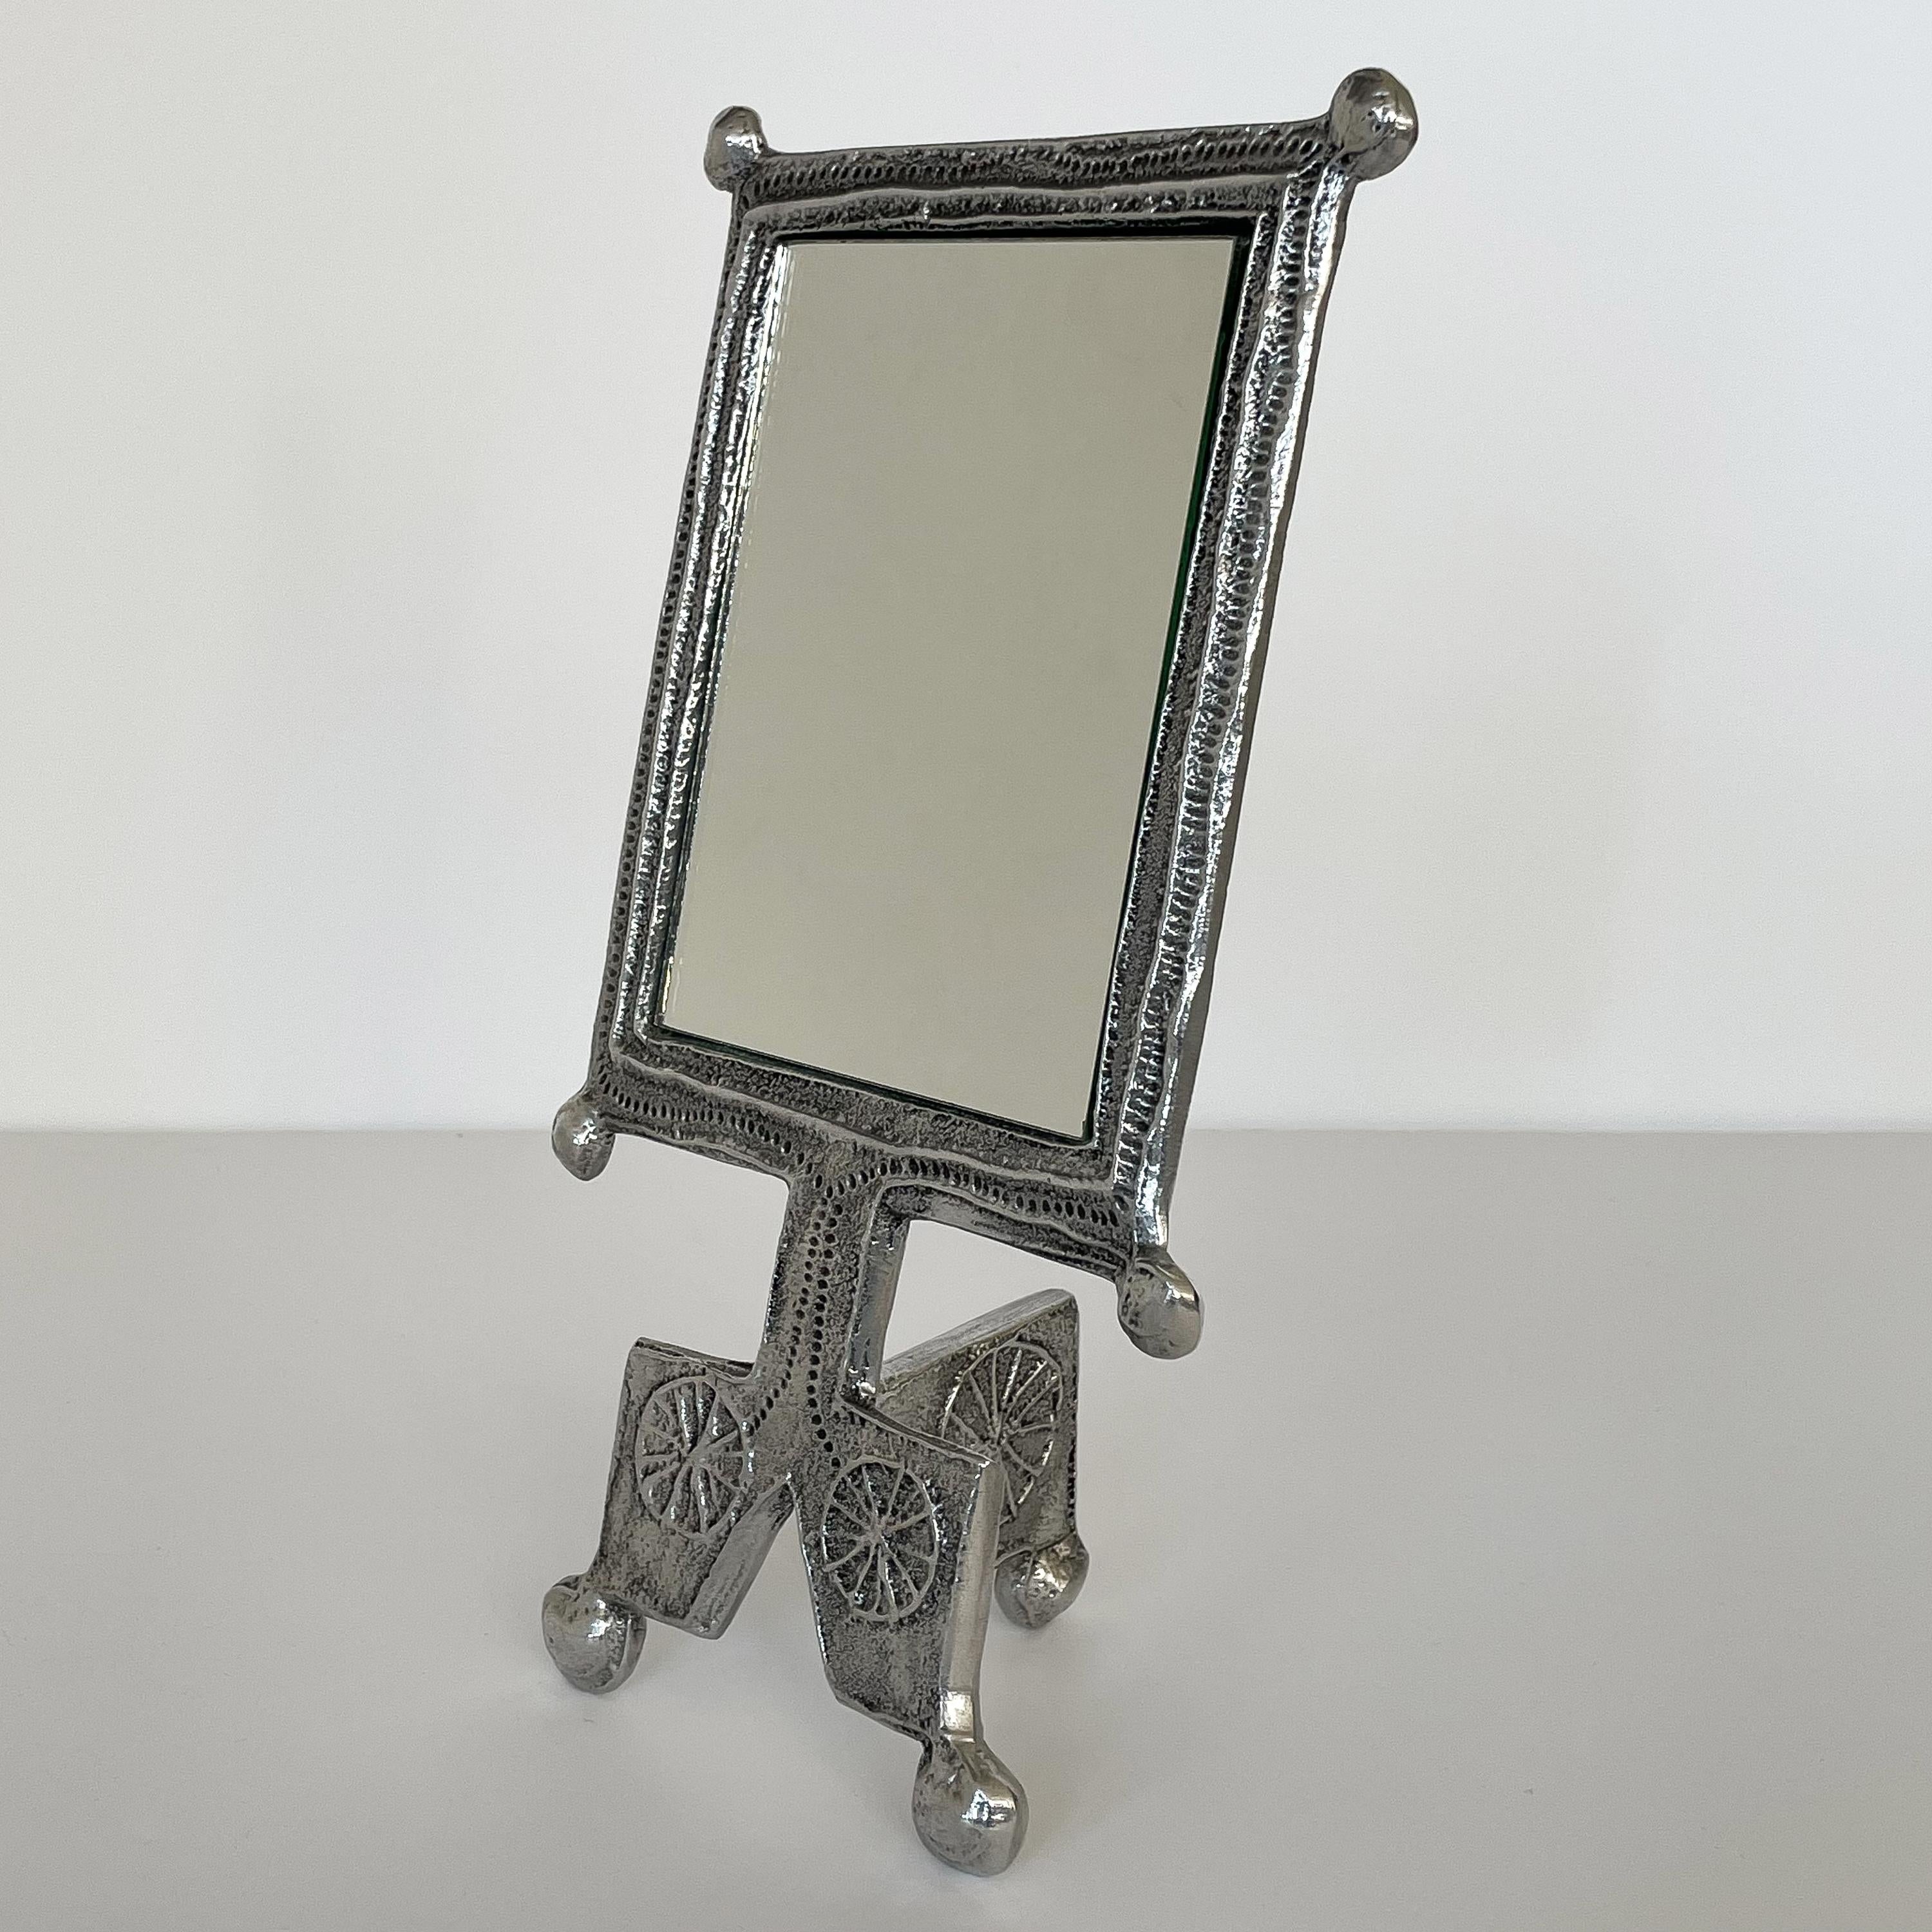 Donald Drumm aluminum standing vanity mirror with face. Brutalist cast aluminum frame and tripod stand. Rectangular mirror measures 5